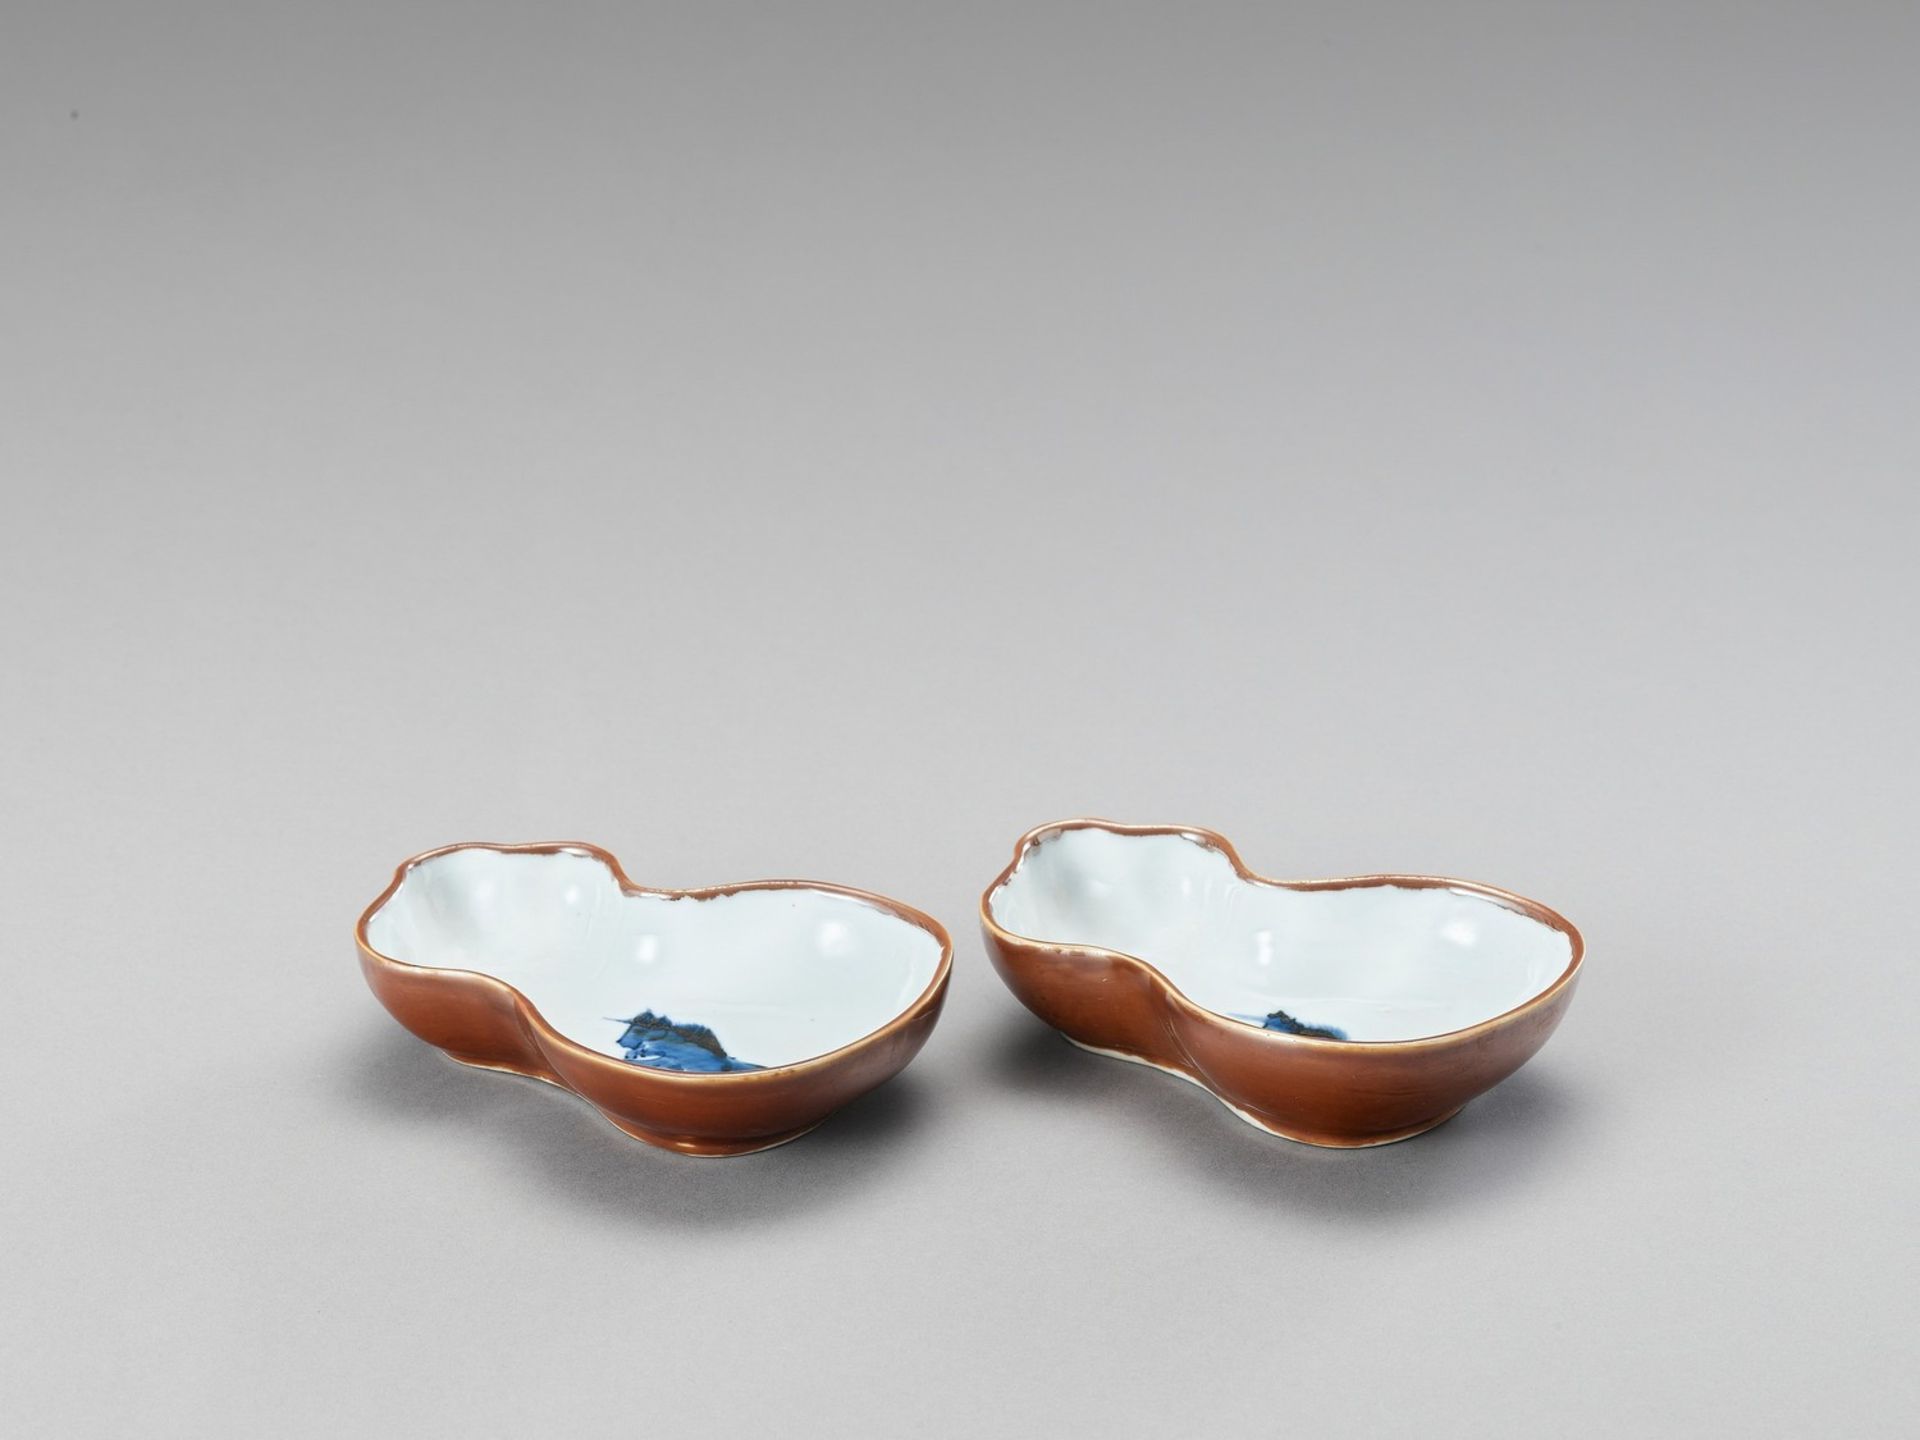 A PAIR OF GOURD-SHAPED PORCELAIN SAUCERS